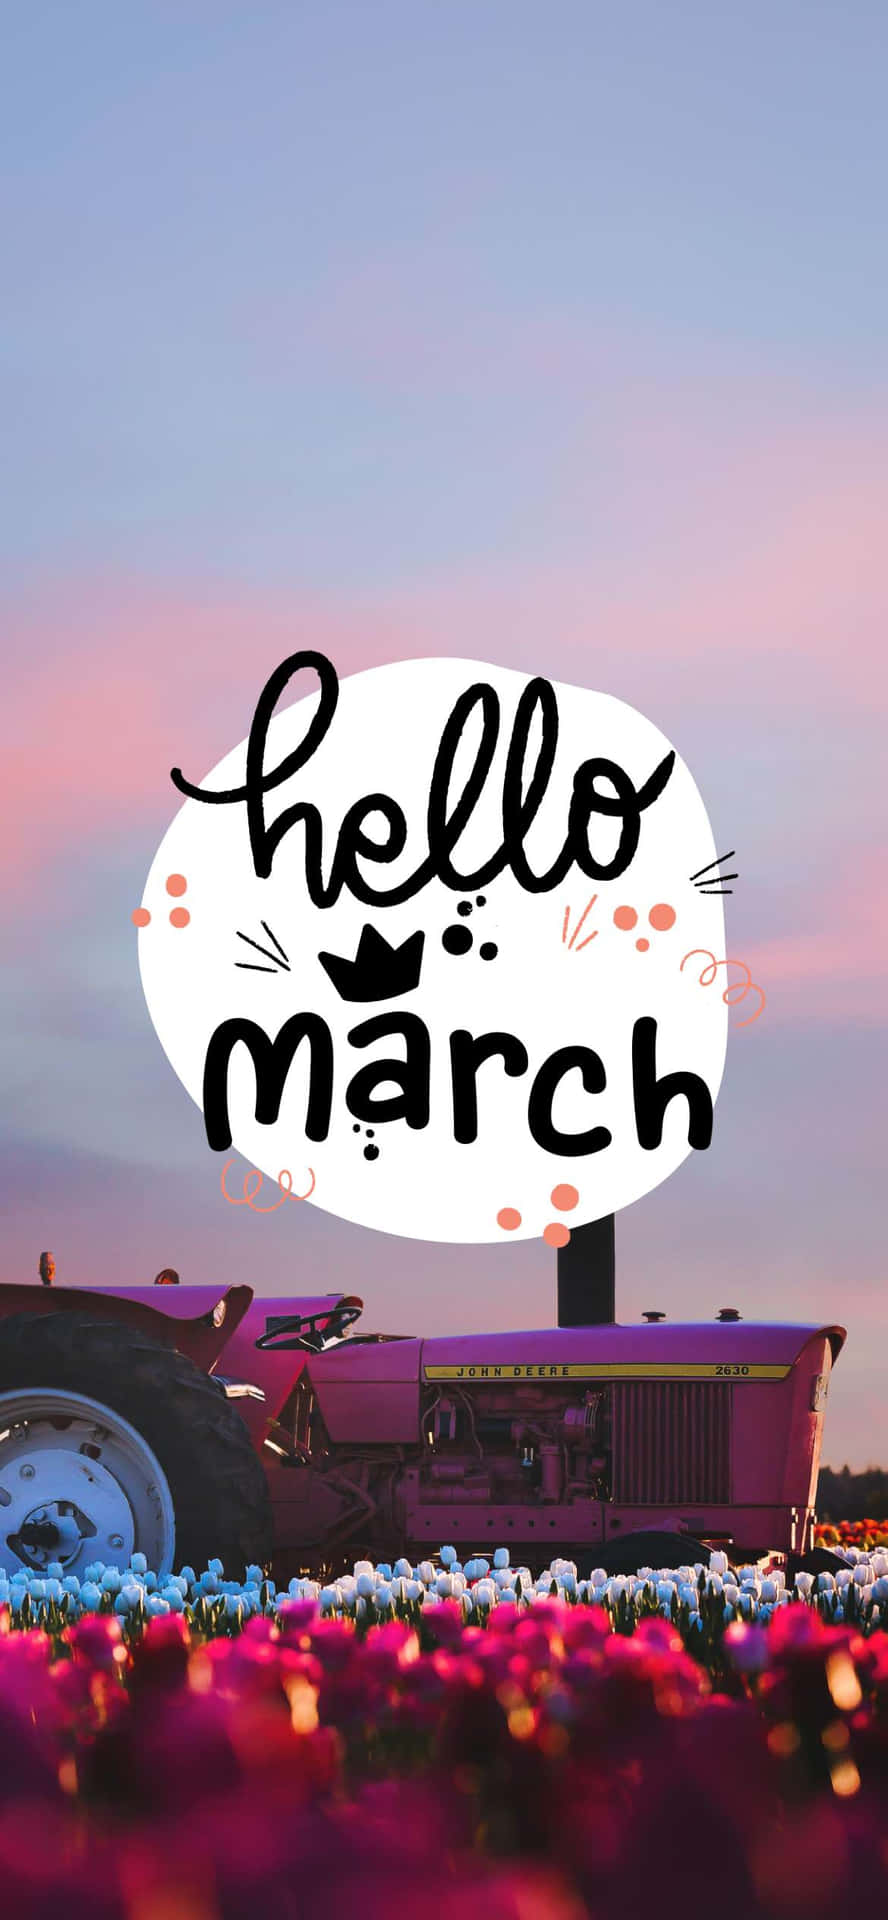 Hello March Red Tractor On Field Of Flowers Wallpaper